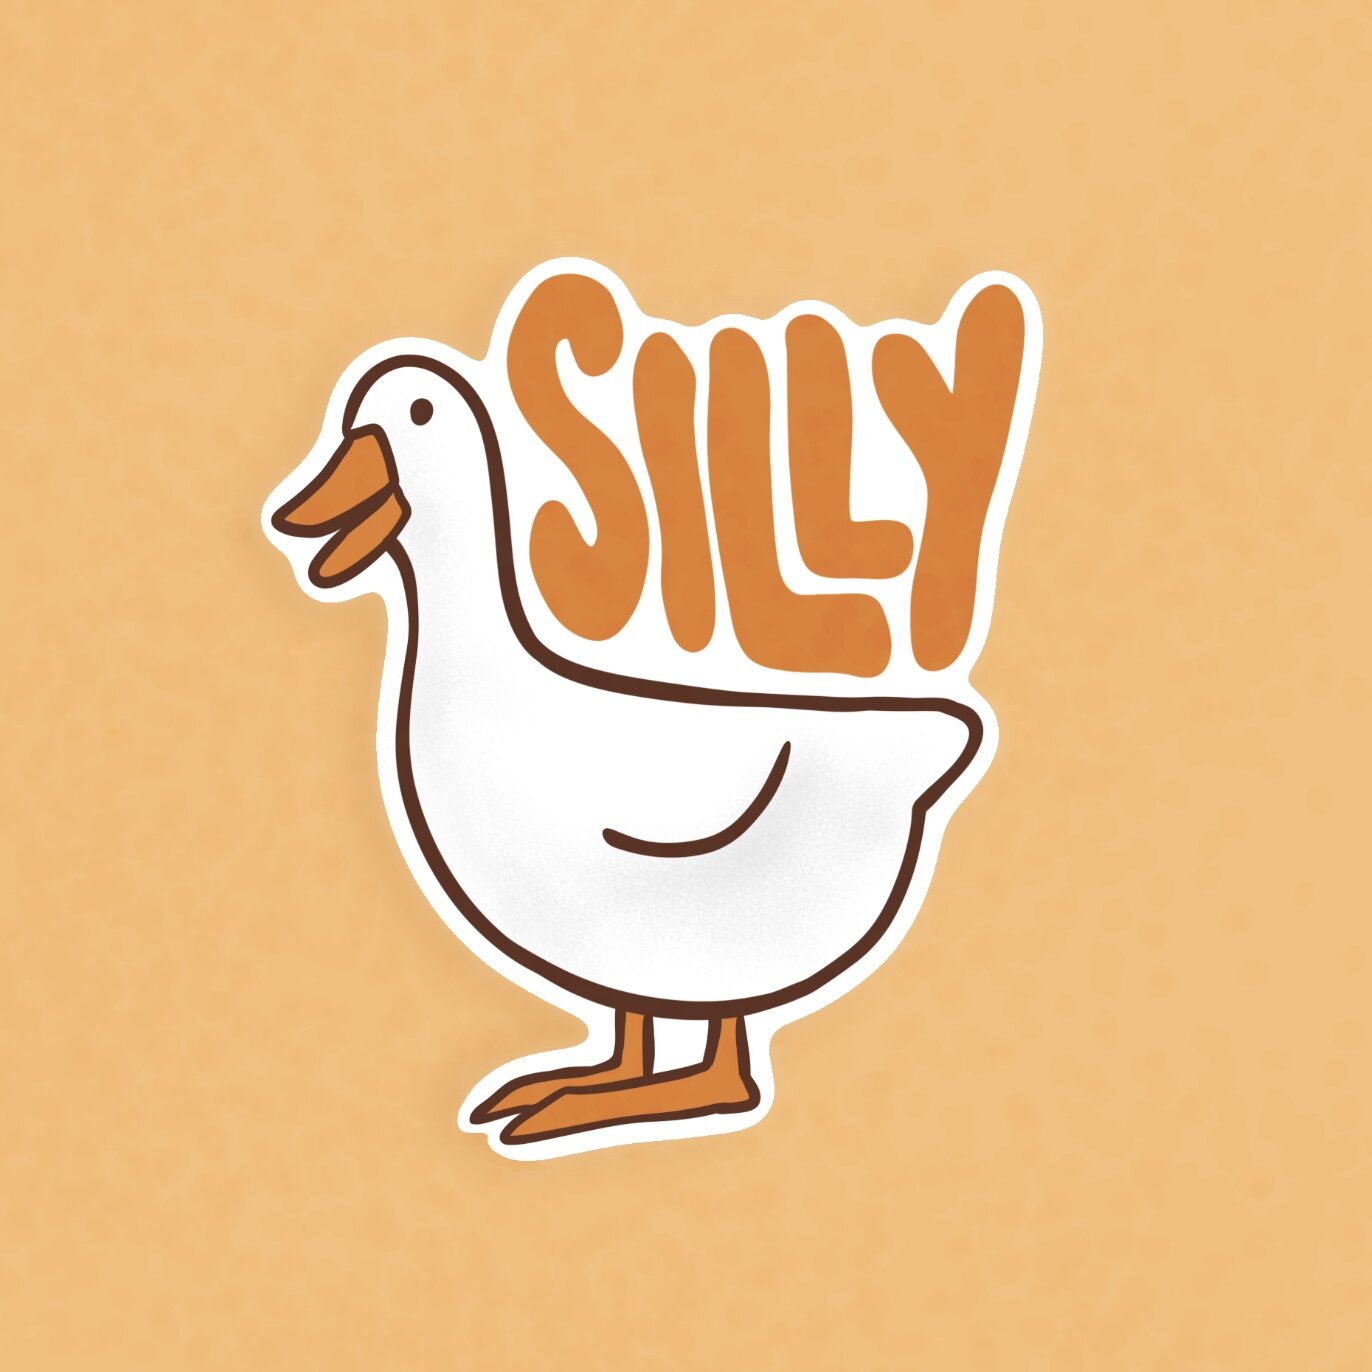 you silly goose 🧡 new spring designs coming soon 💛

#graphicdesign #design #typography  #handlettering #typographydesign  #shopsmall #creative #graphicdesigndaily #cincinnatiartist #stickerdesign #stickershop #sillygoose #goose #cuteart #procreatea